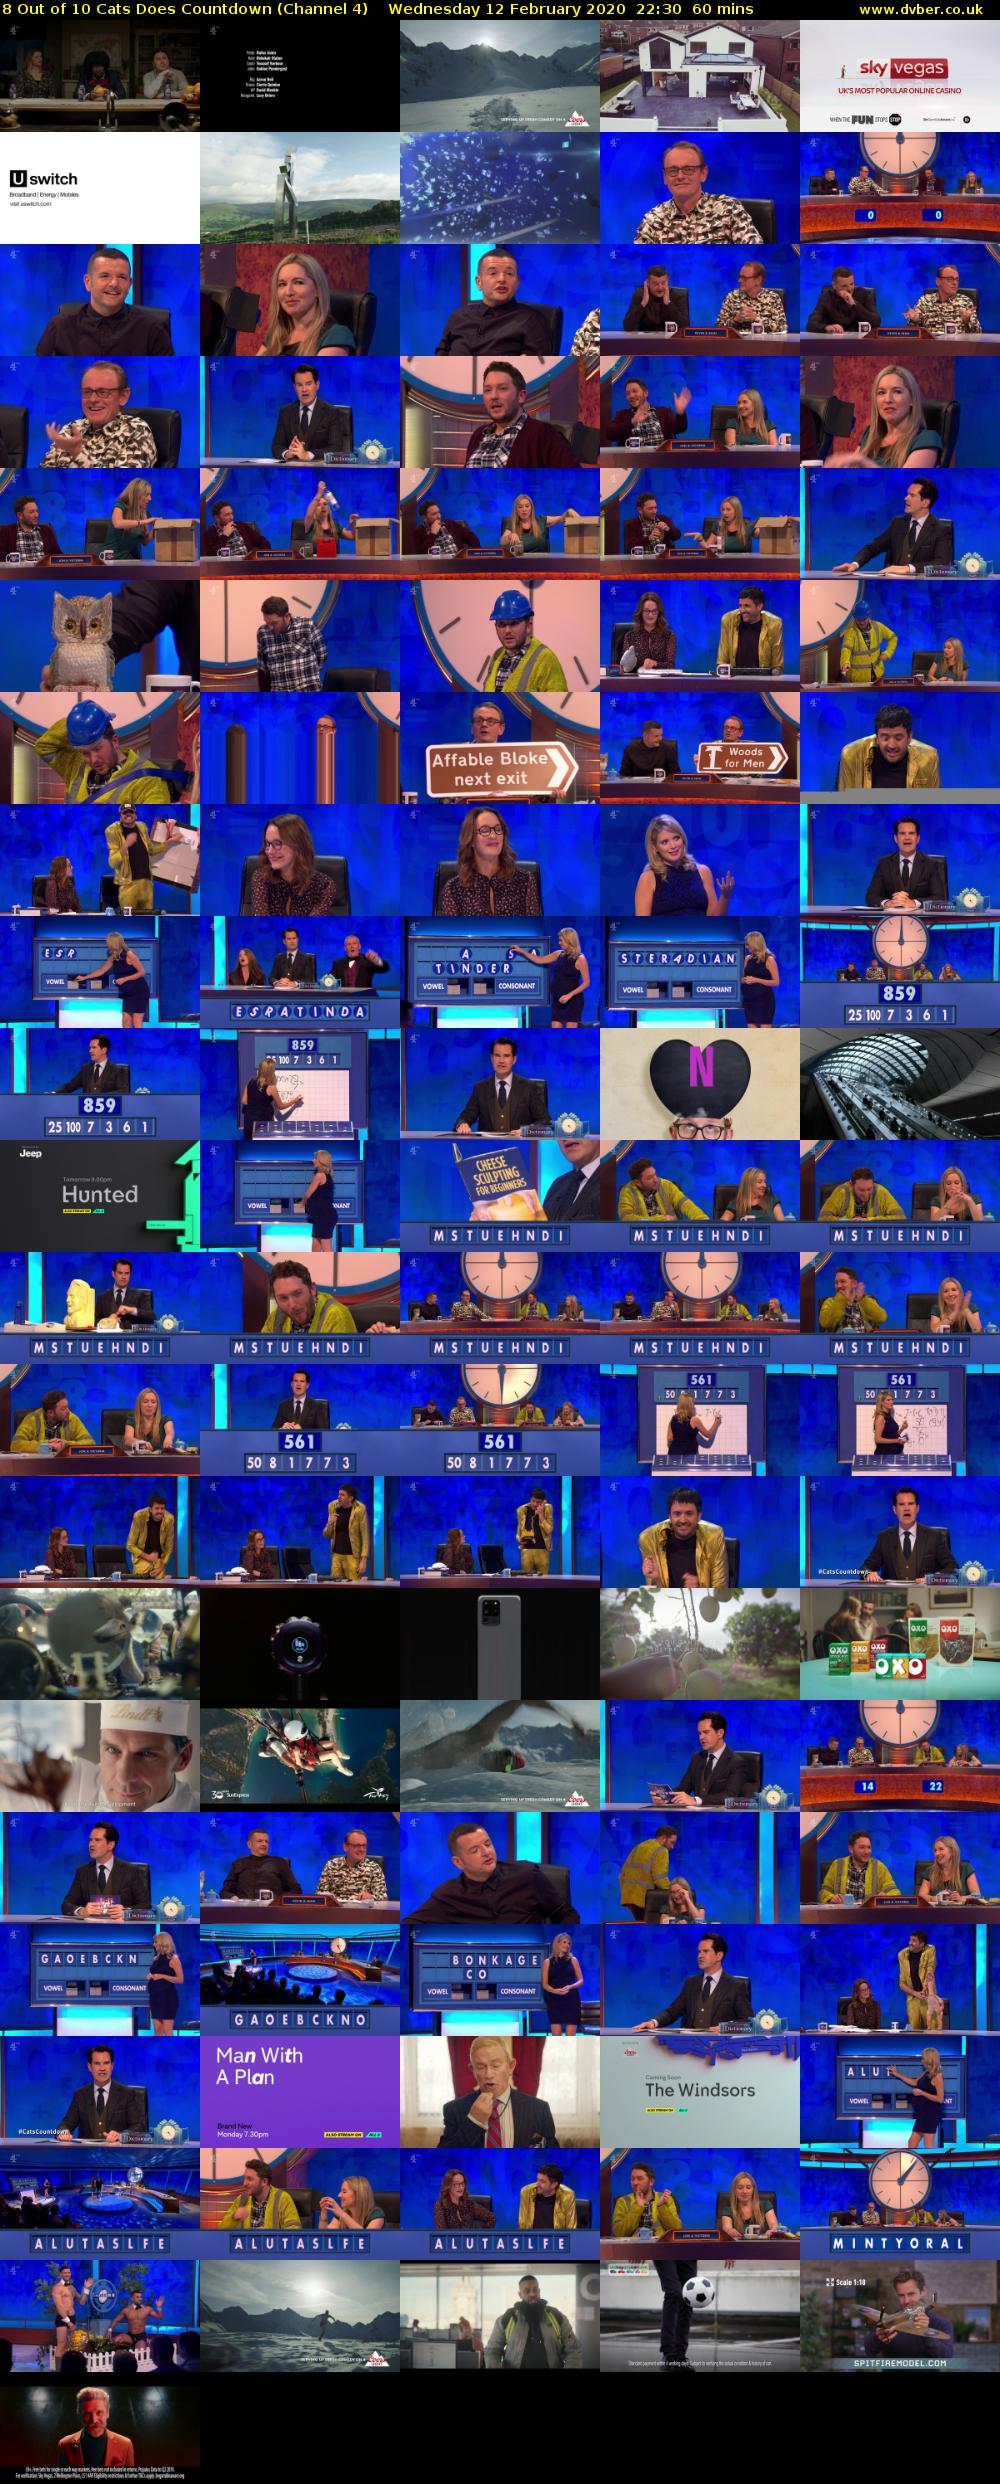 8 Out of 10 Cats Does Countdown (Channel 4) Wednesday 12 February 2020 22:30 - 23:30